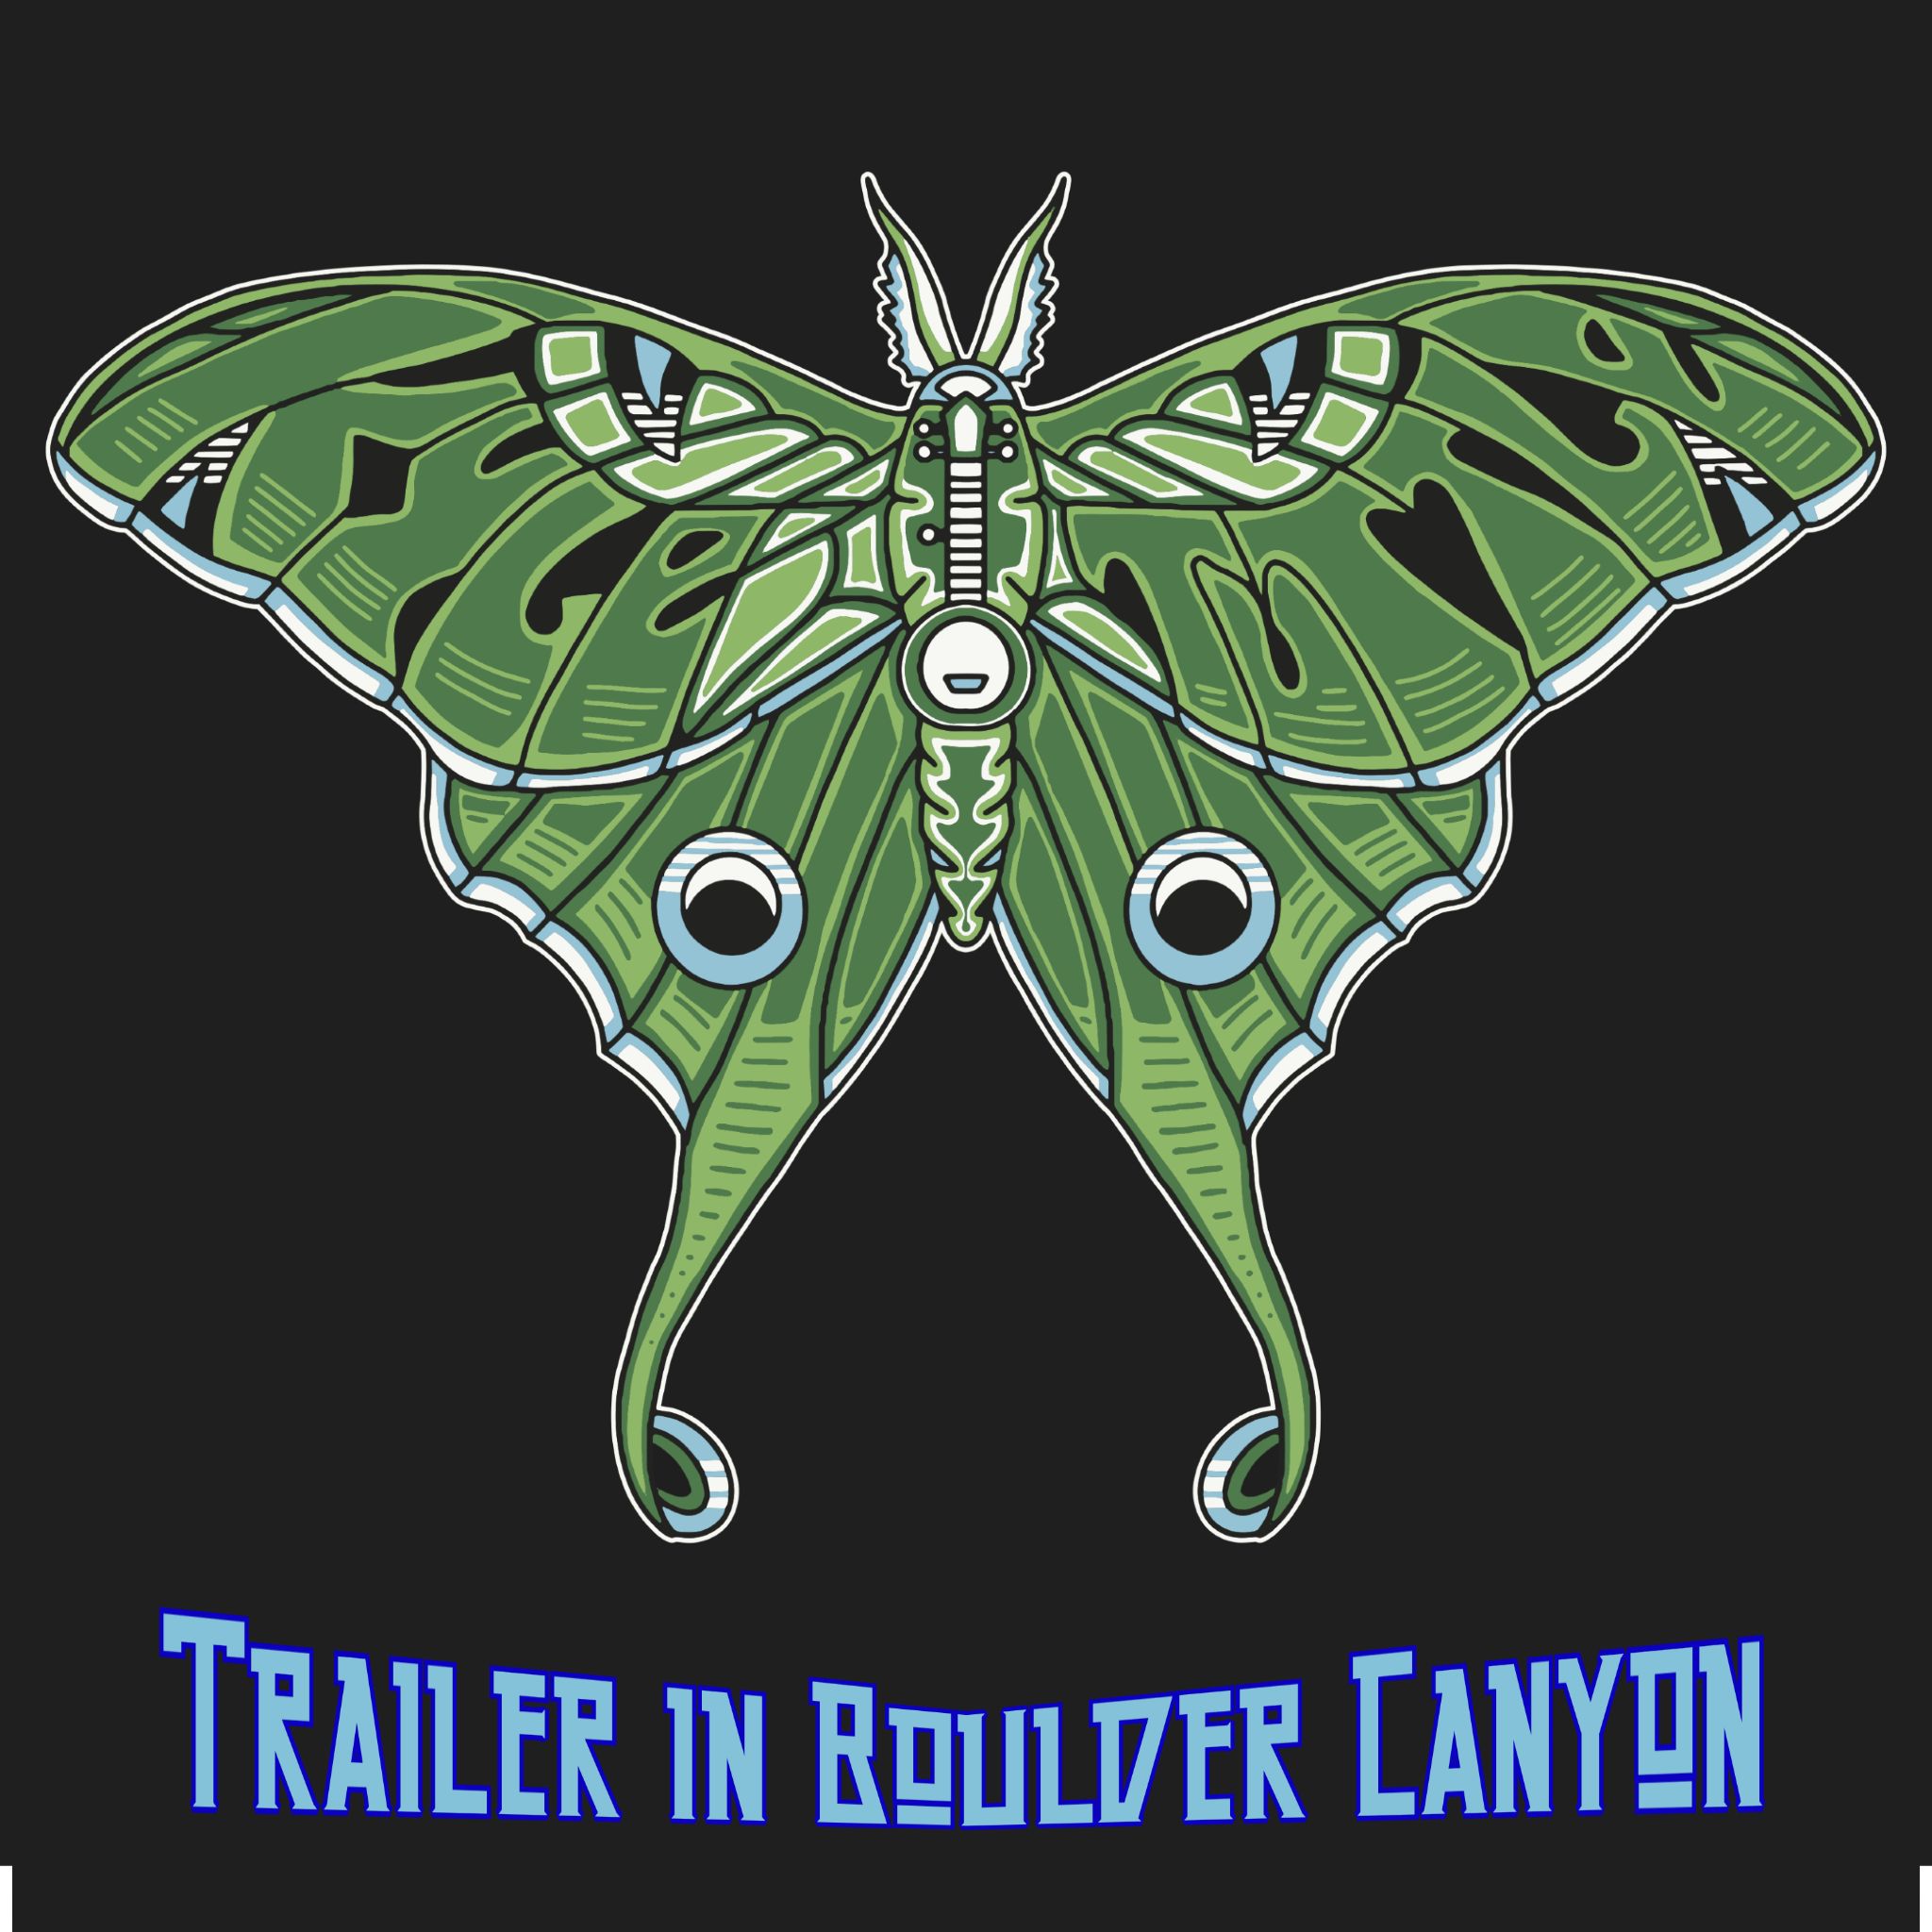 Kyle Tuttle Releases New Single 'Trailer in Boulder Canyon'